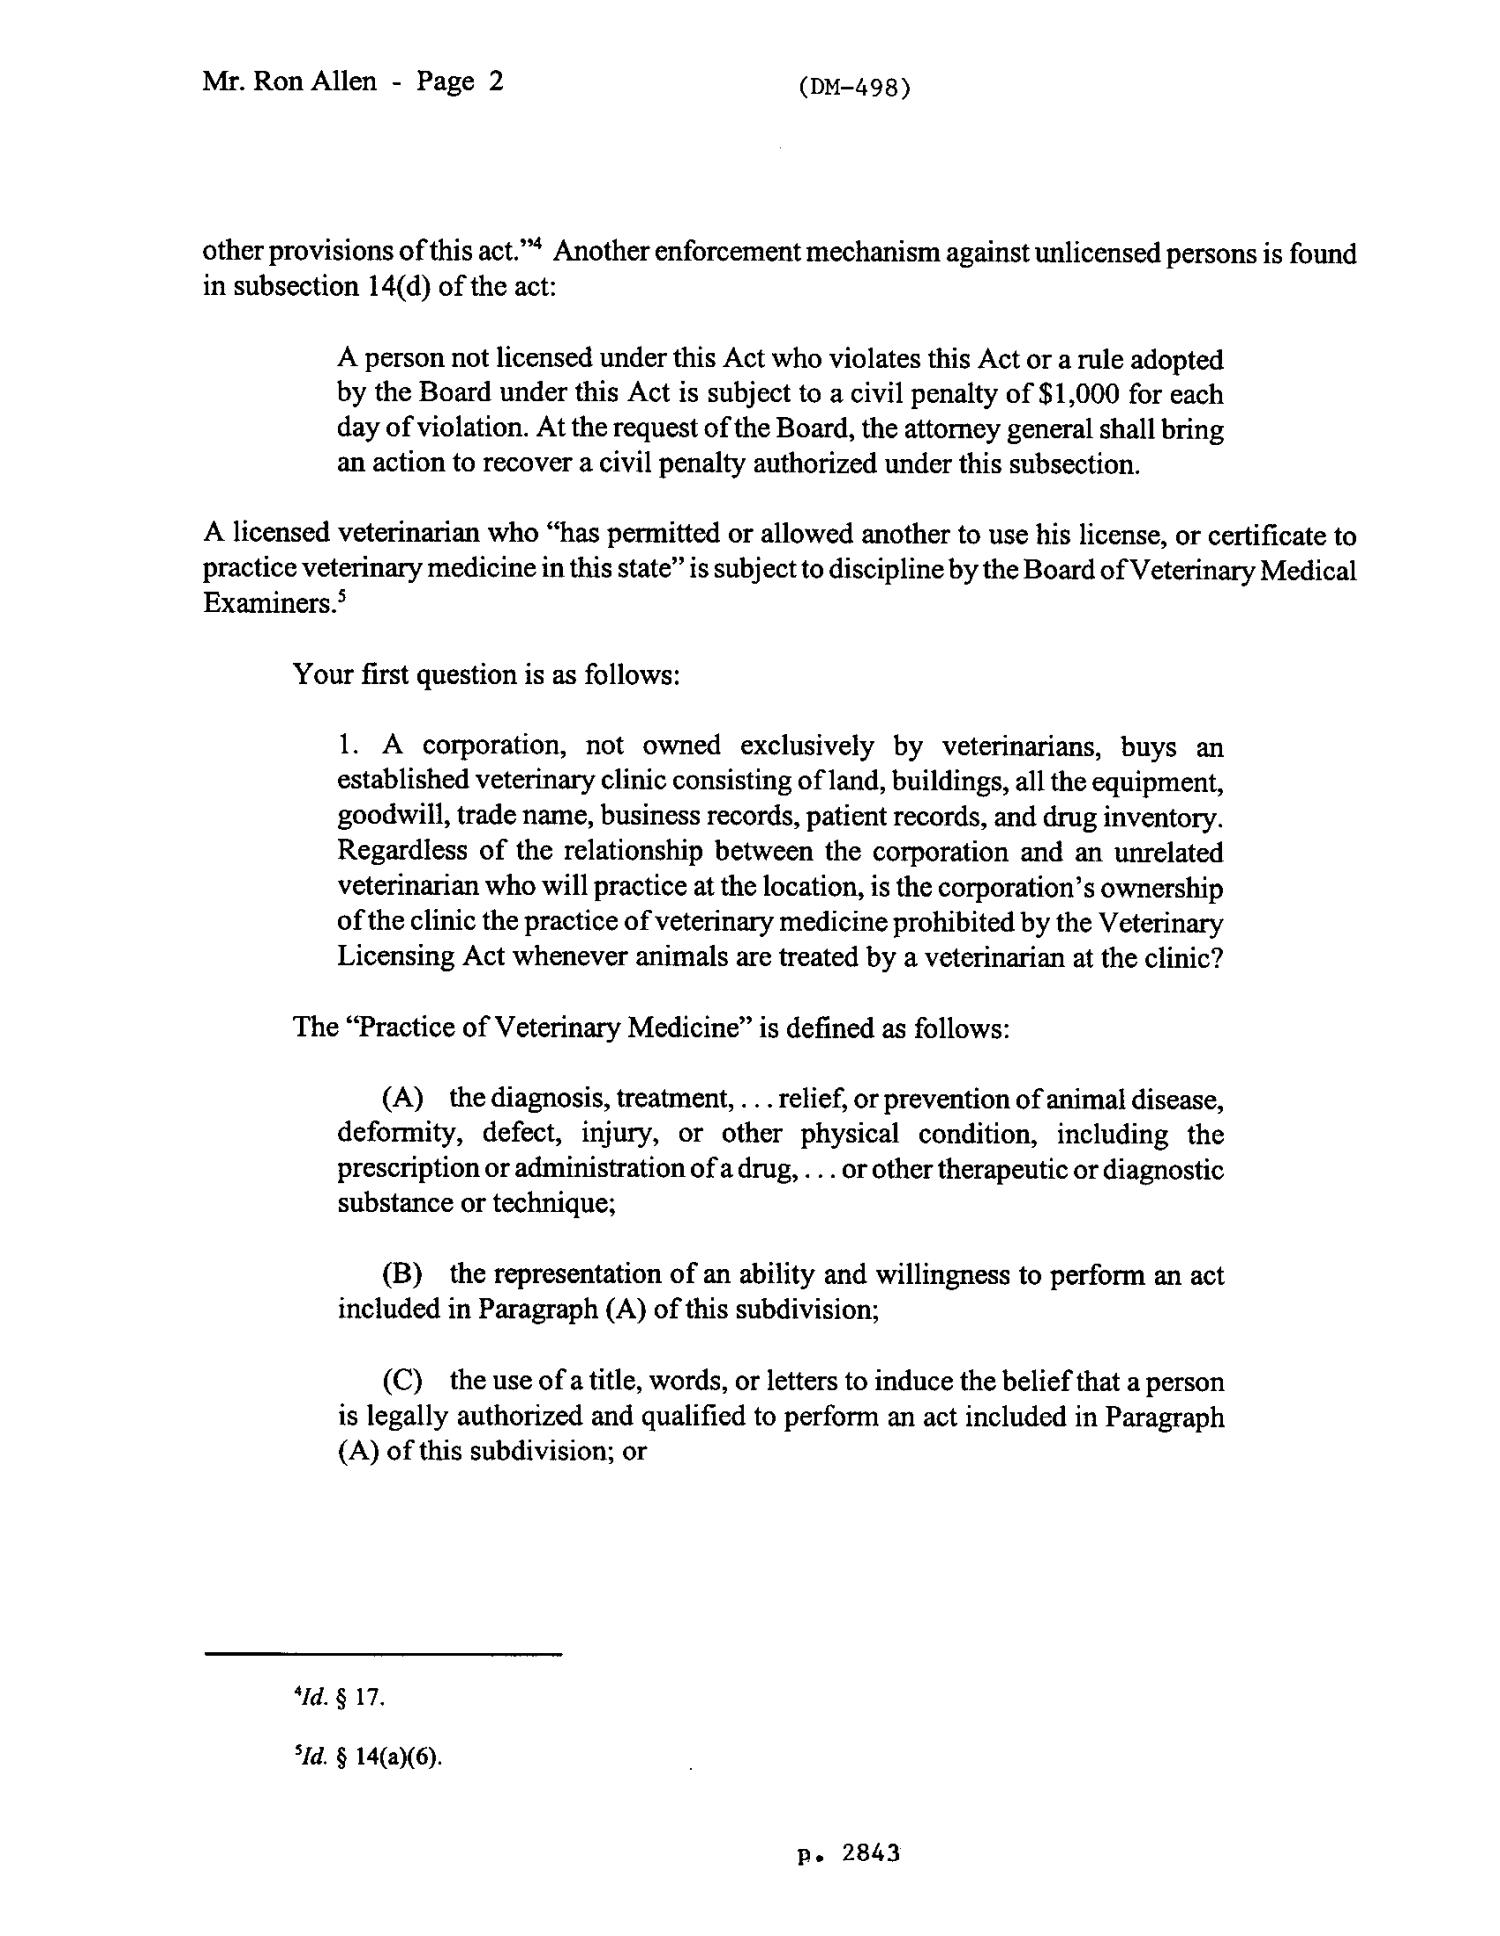 Texas Attorney General Opinion: DM-498
                                                
                                                    [Sequence #]: 2 of 10
                                                